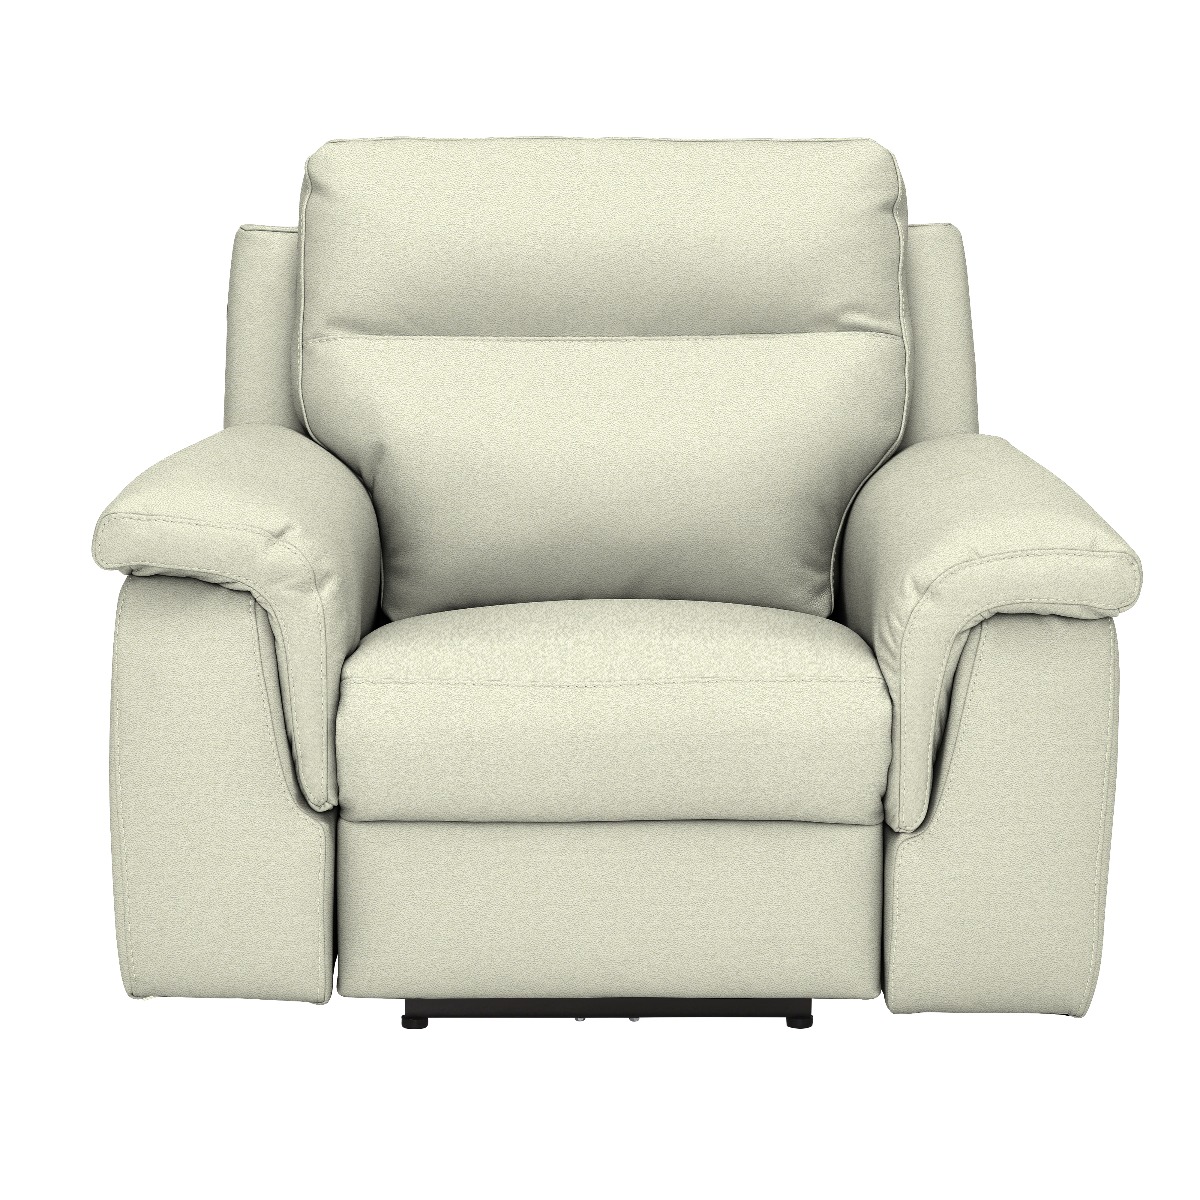 Fulton Recliner Chair With Electric Recliner, White | Barker & Stonehouse